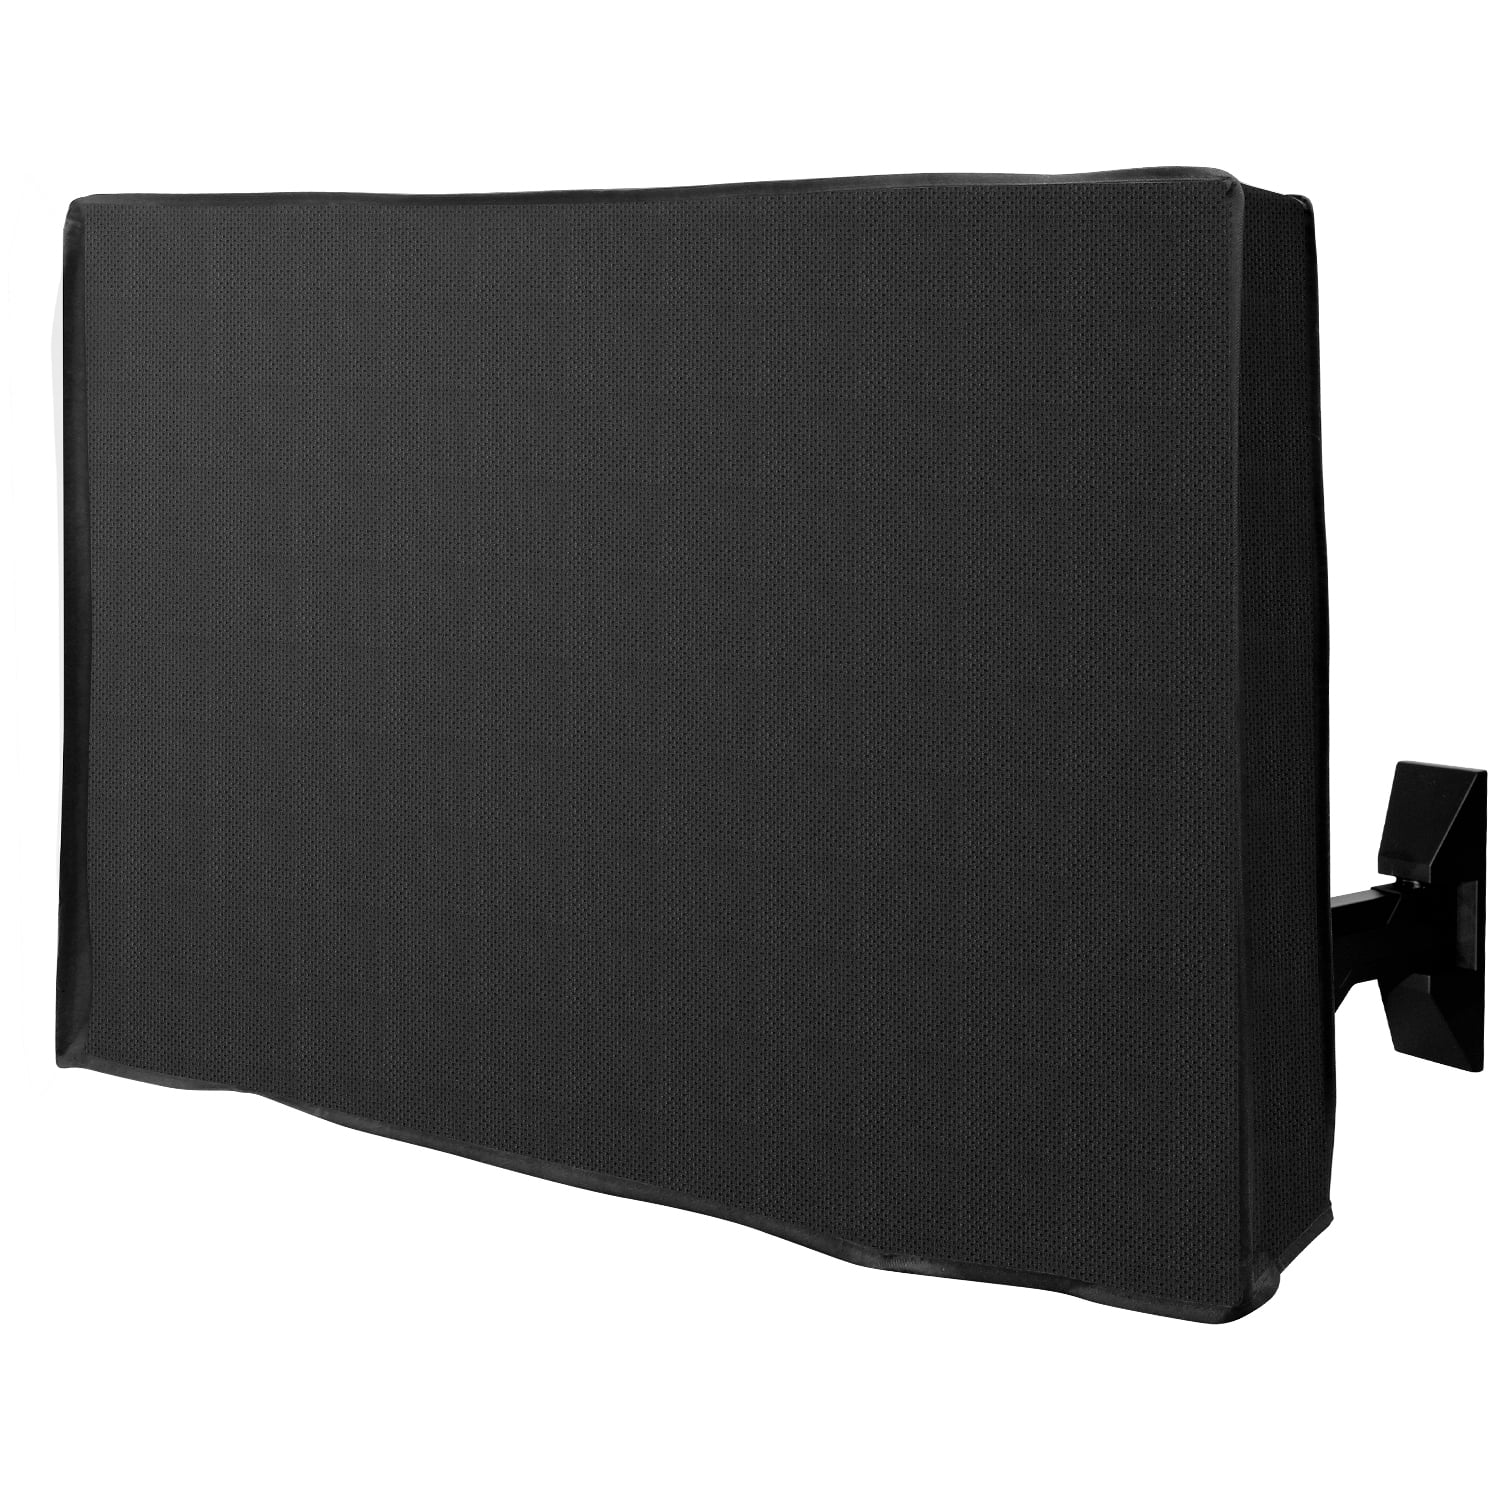 Onn Indoor/Outdoor TV Cover for 55'' To 58" TVs